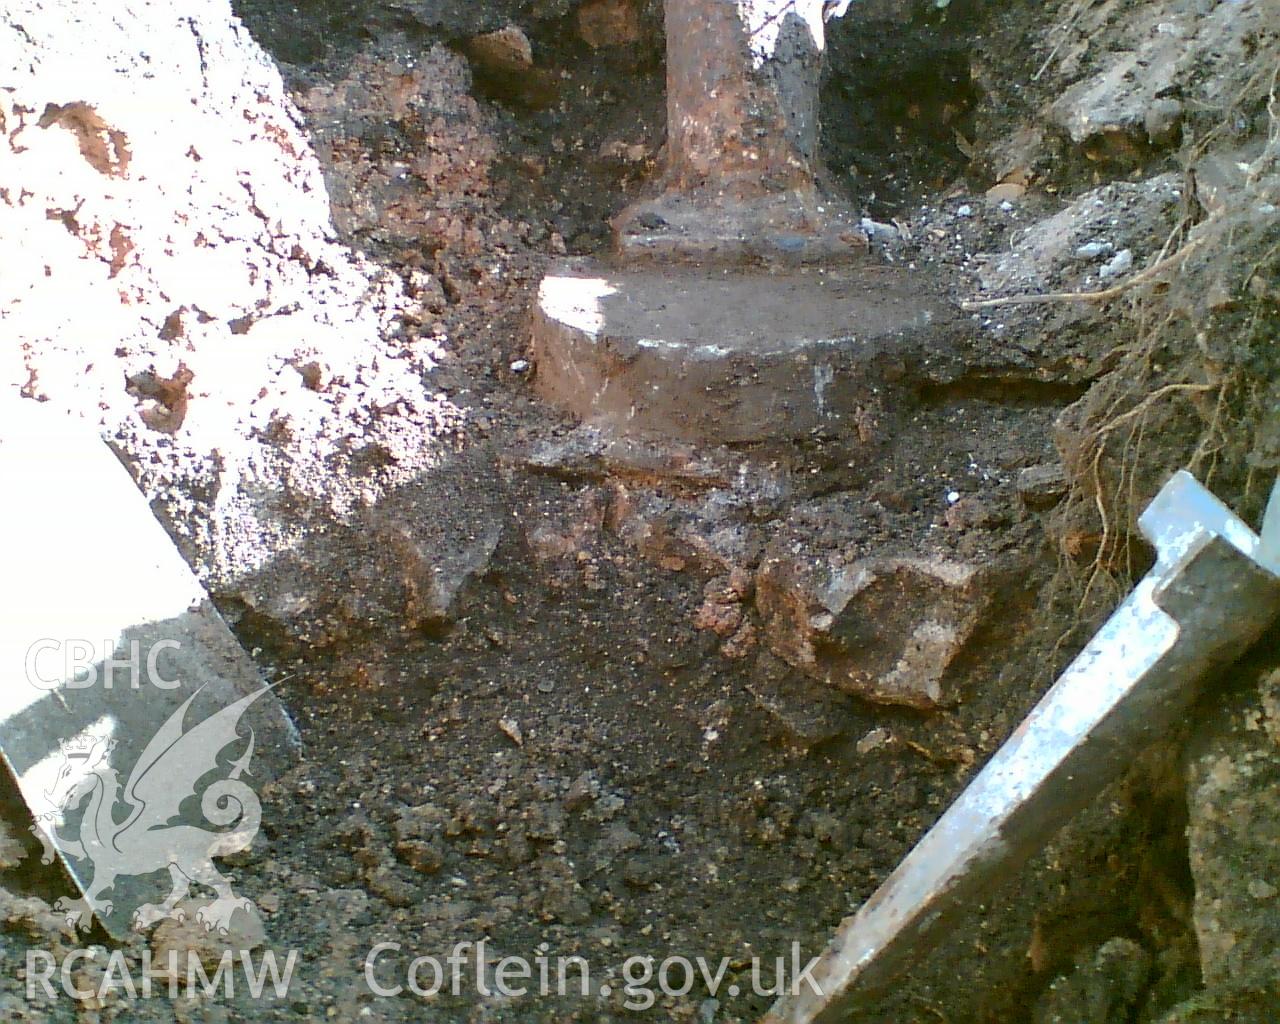 Wyelands Home Farm, Mathern; digital photo received in the course of Emergency Recording case ref no RCS2/1/1167.